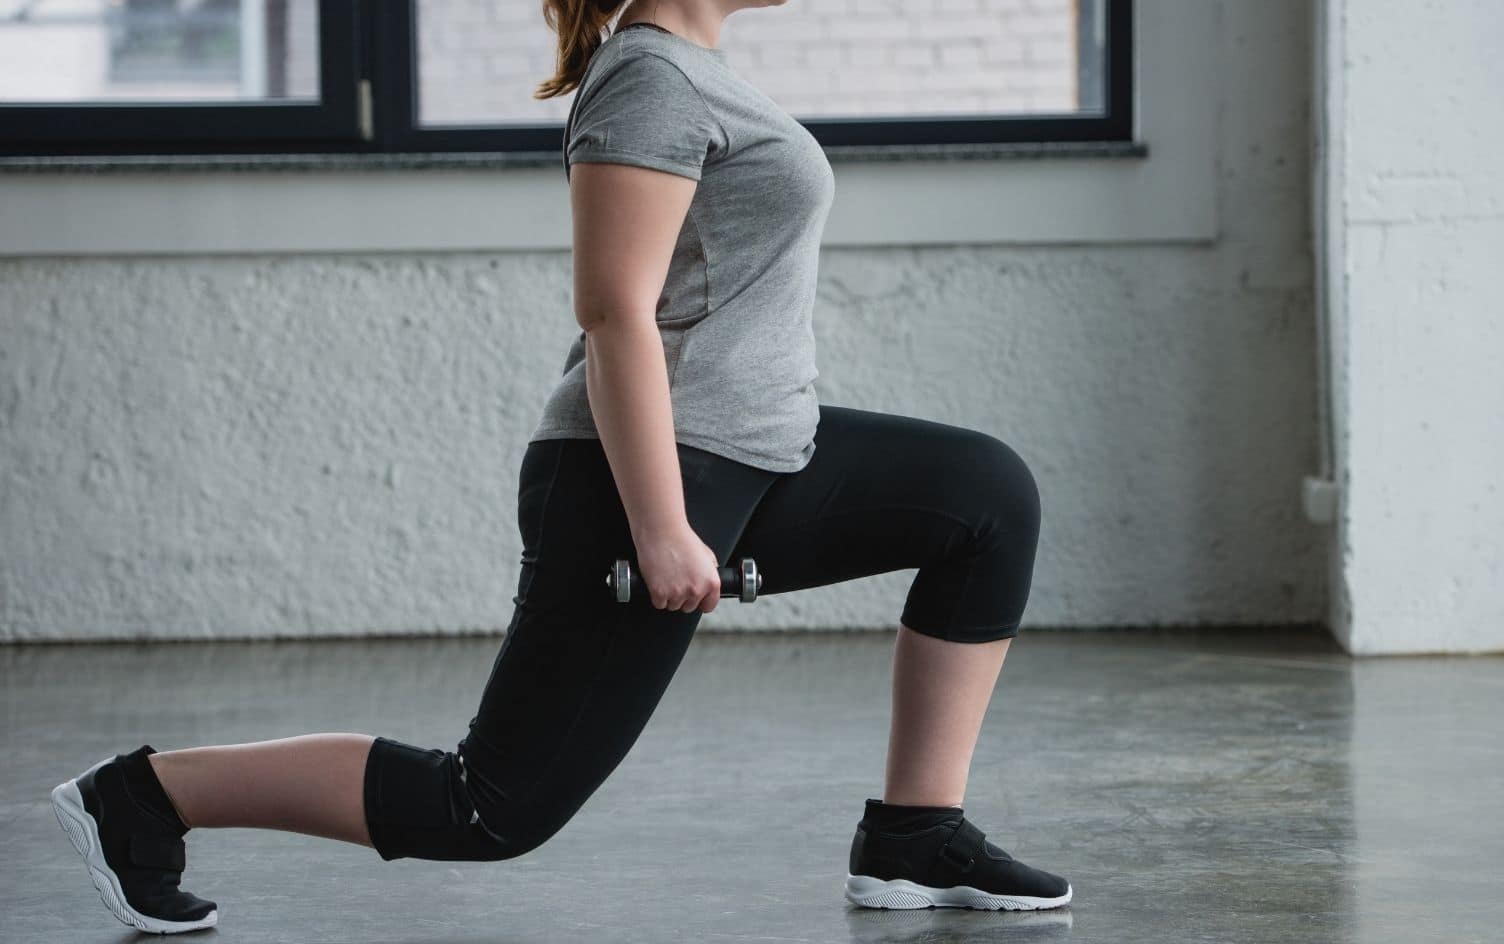 11 Lunge Variations to Level up Your Leg Workout